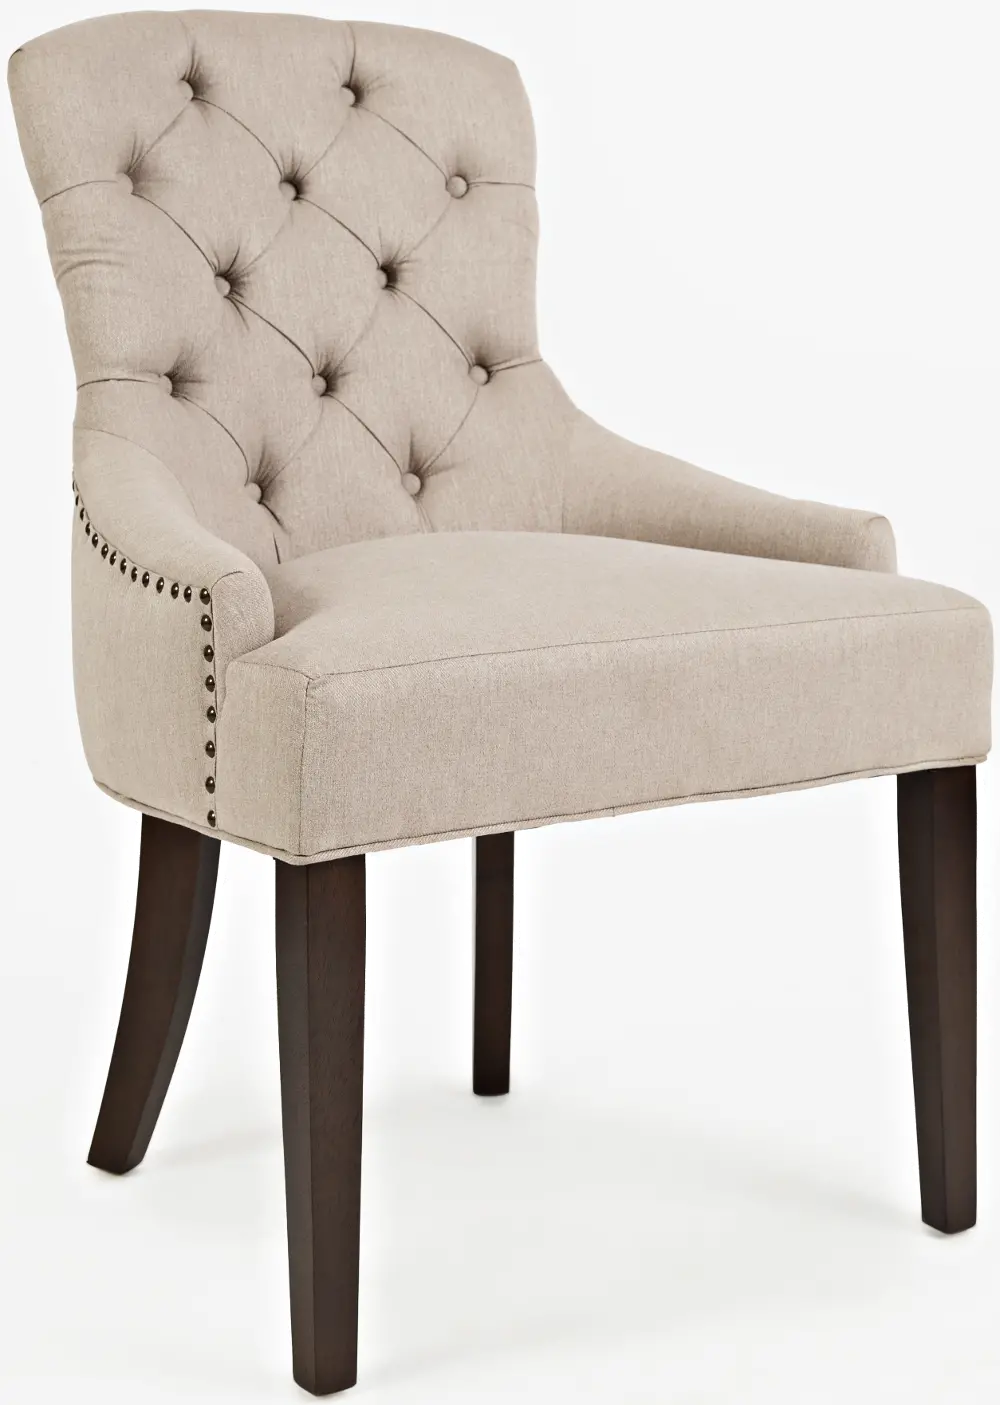 Taupe Button-Tufted Upholstered Dining Chair - Gramercy-1